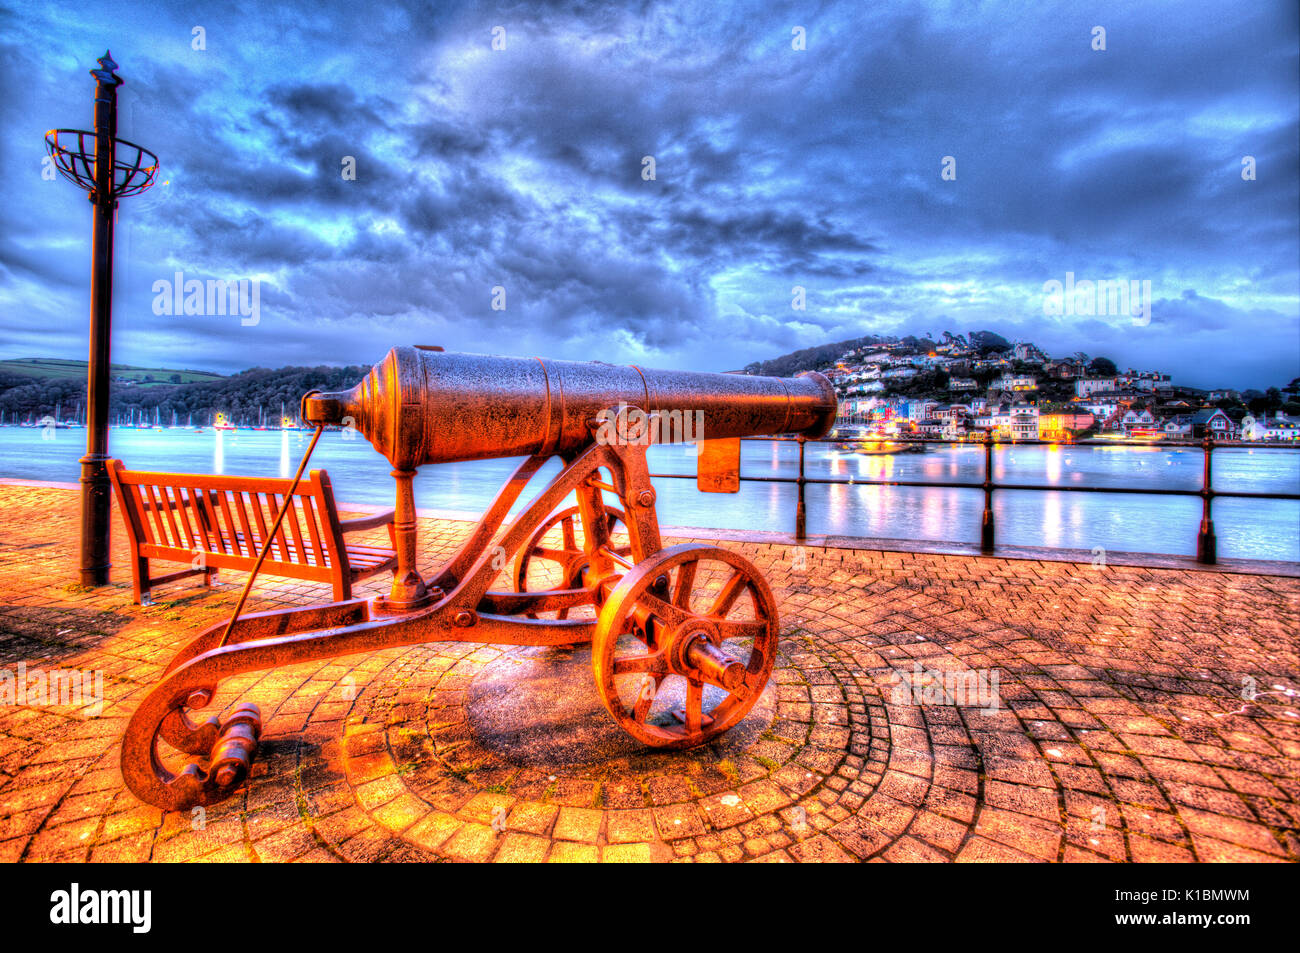 Town of Dartmouth, England. An antique cannon on Dartmouth’s promenade with the River Dart and Kingswear in the background. Stock Photo